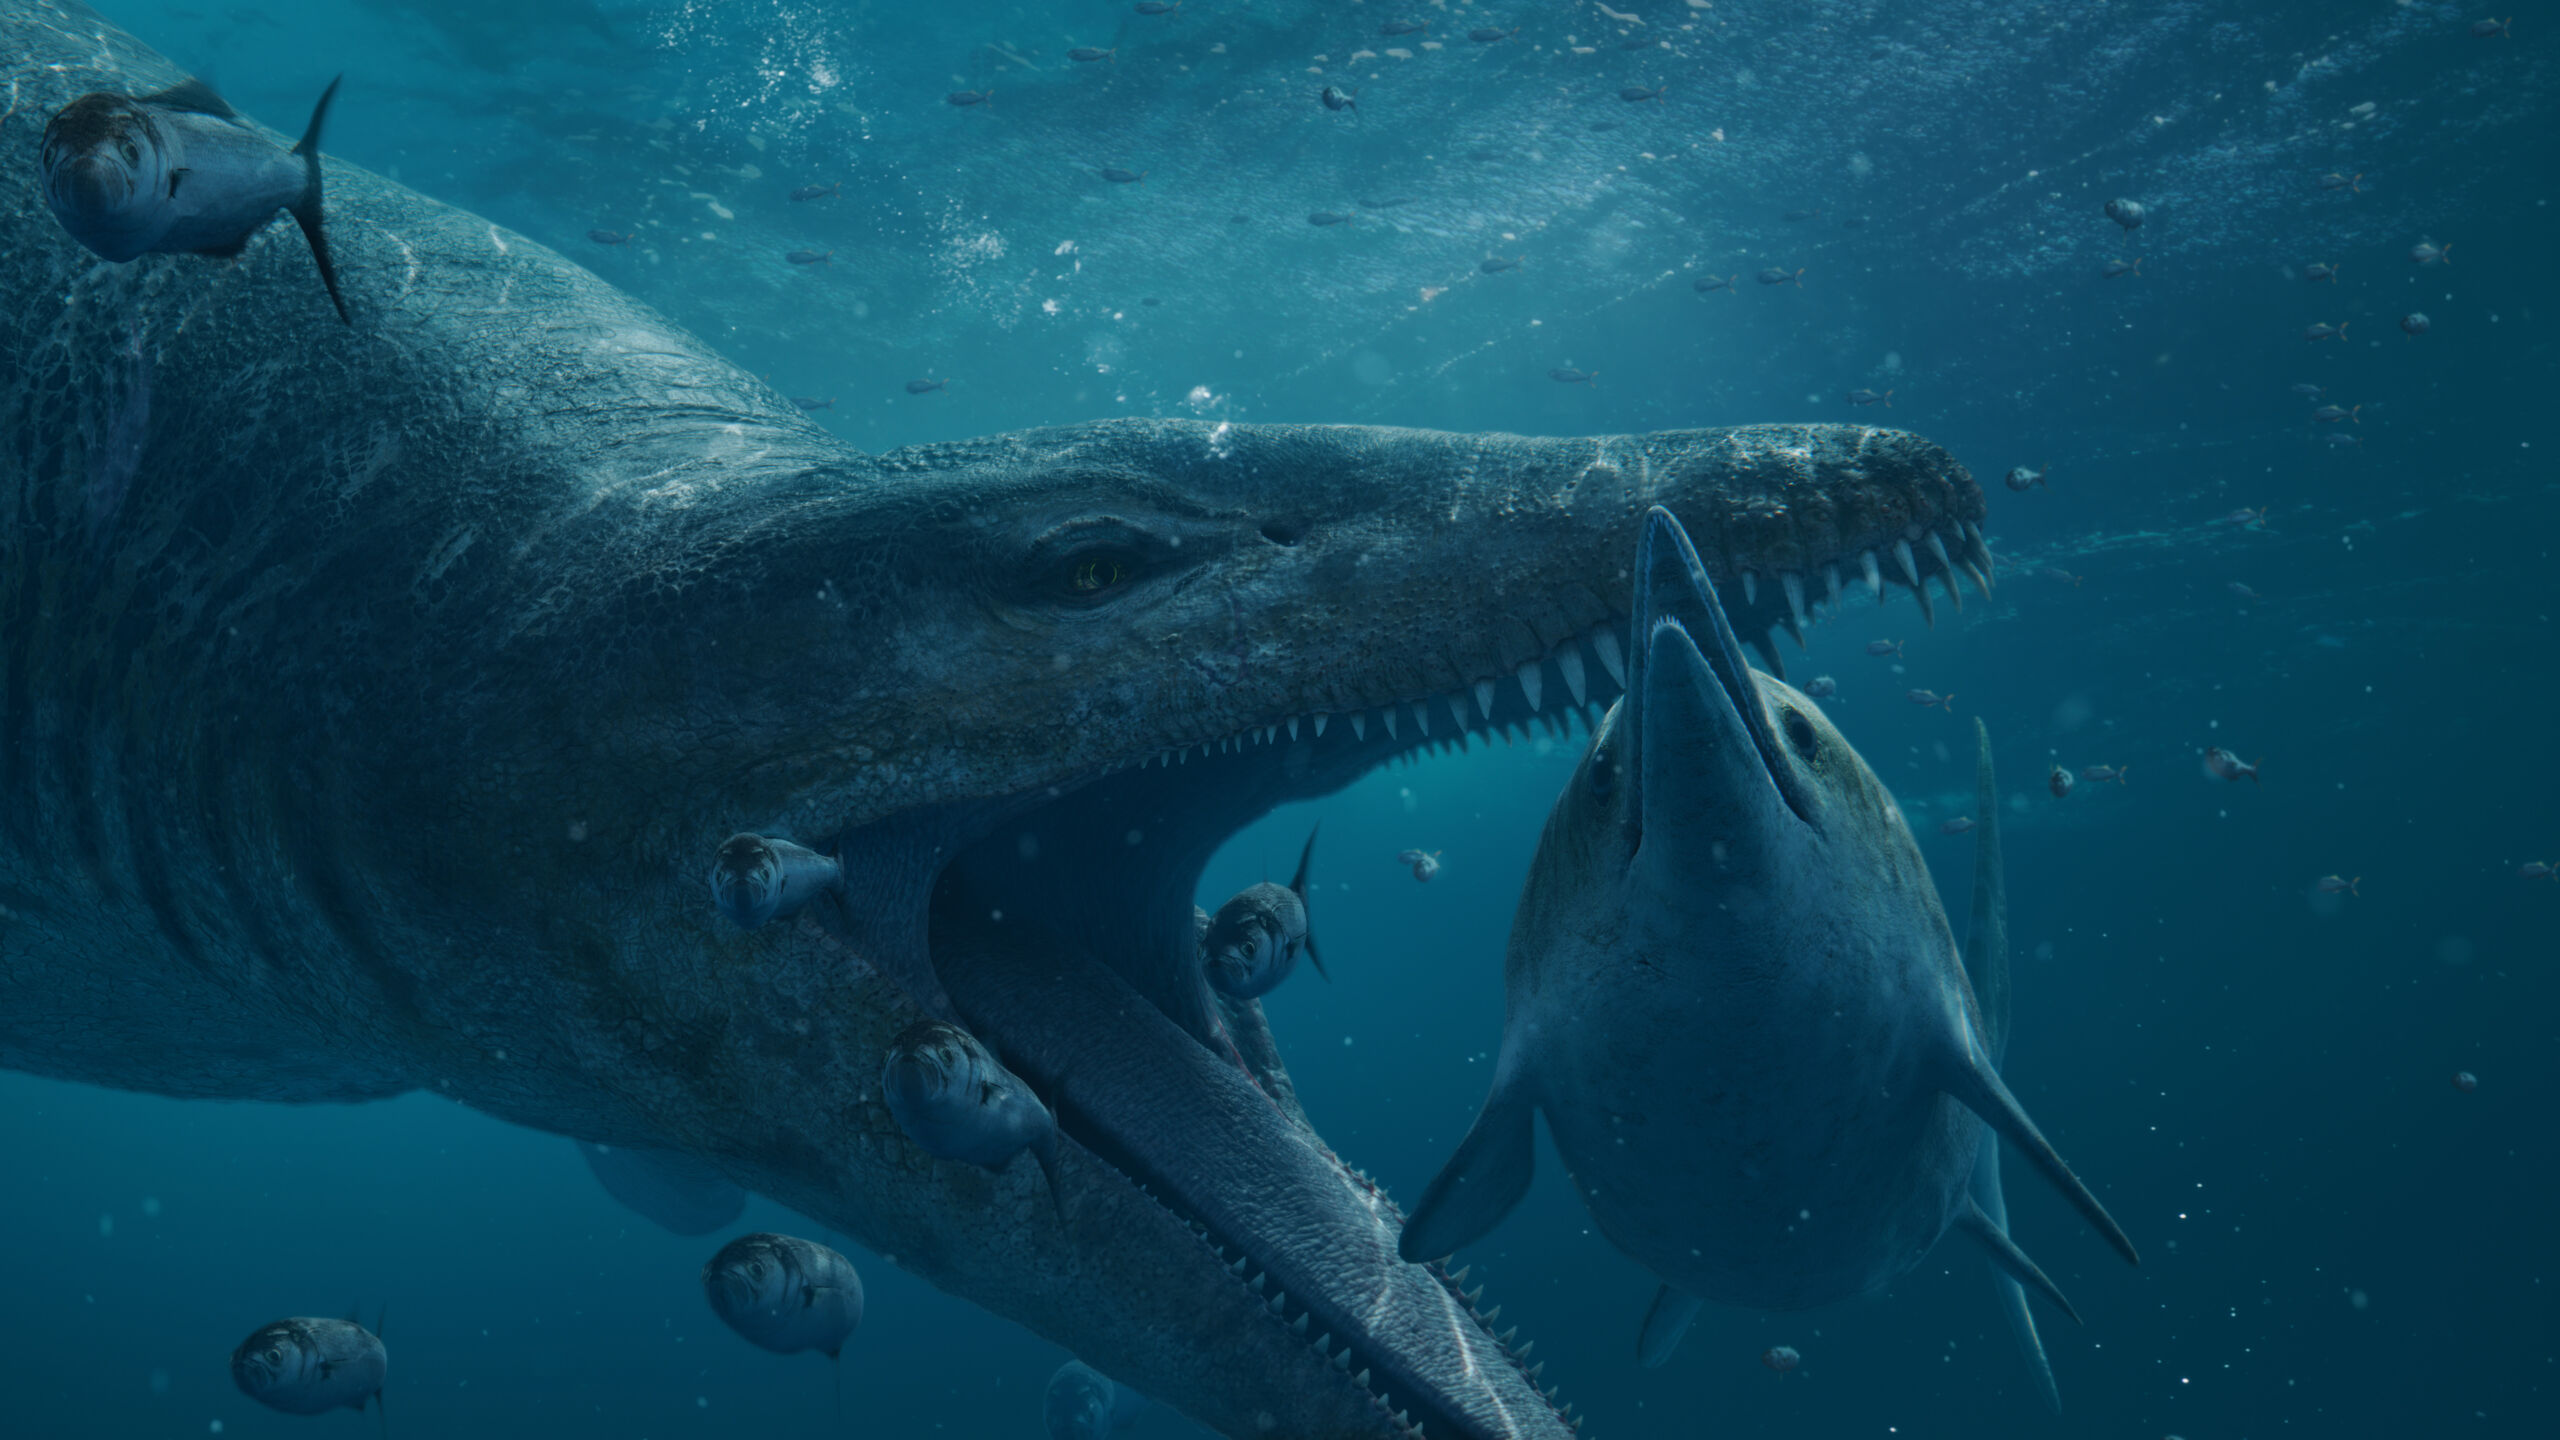 pliosaur, t. rex of the sea, is the jurassic monster of the moment